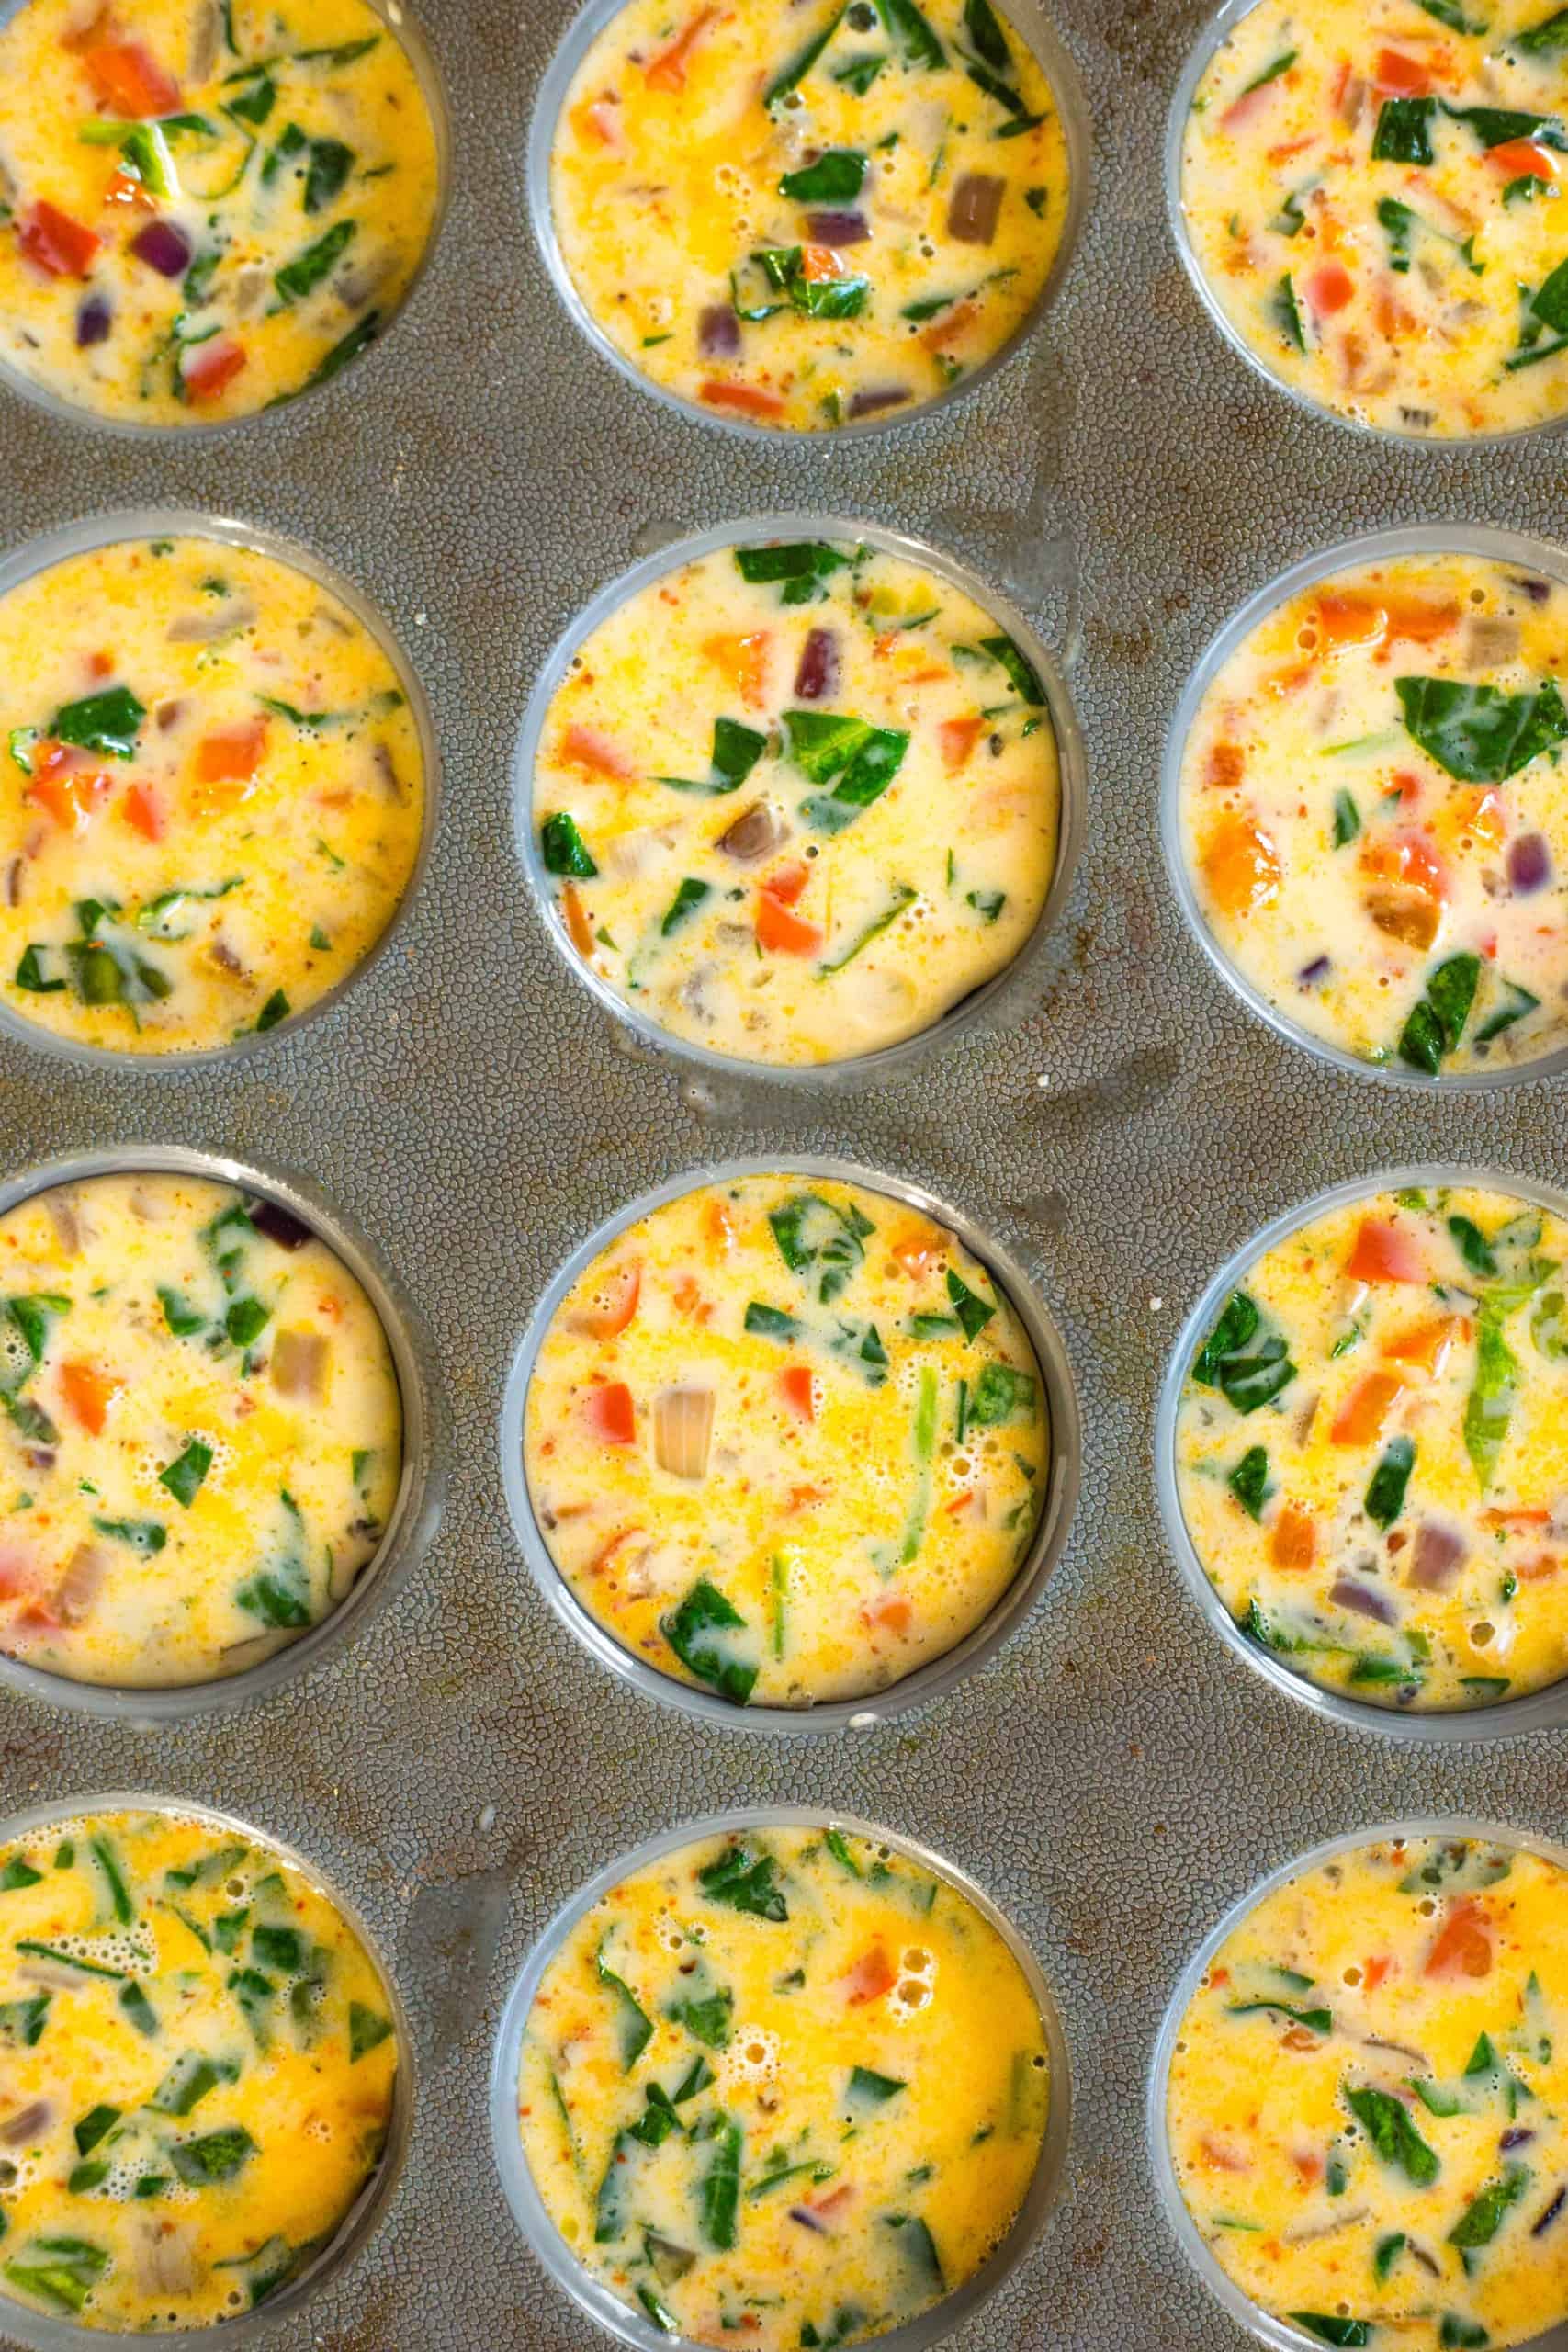 Uncooked quiche batter in silicon muffin mold.